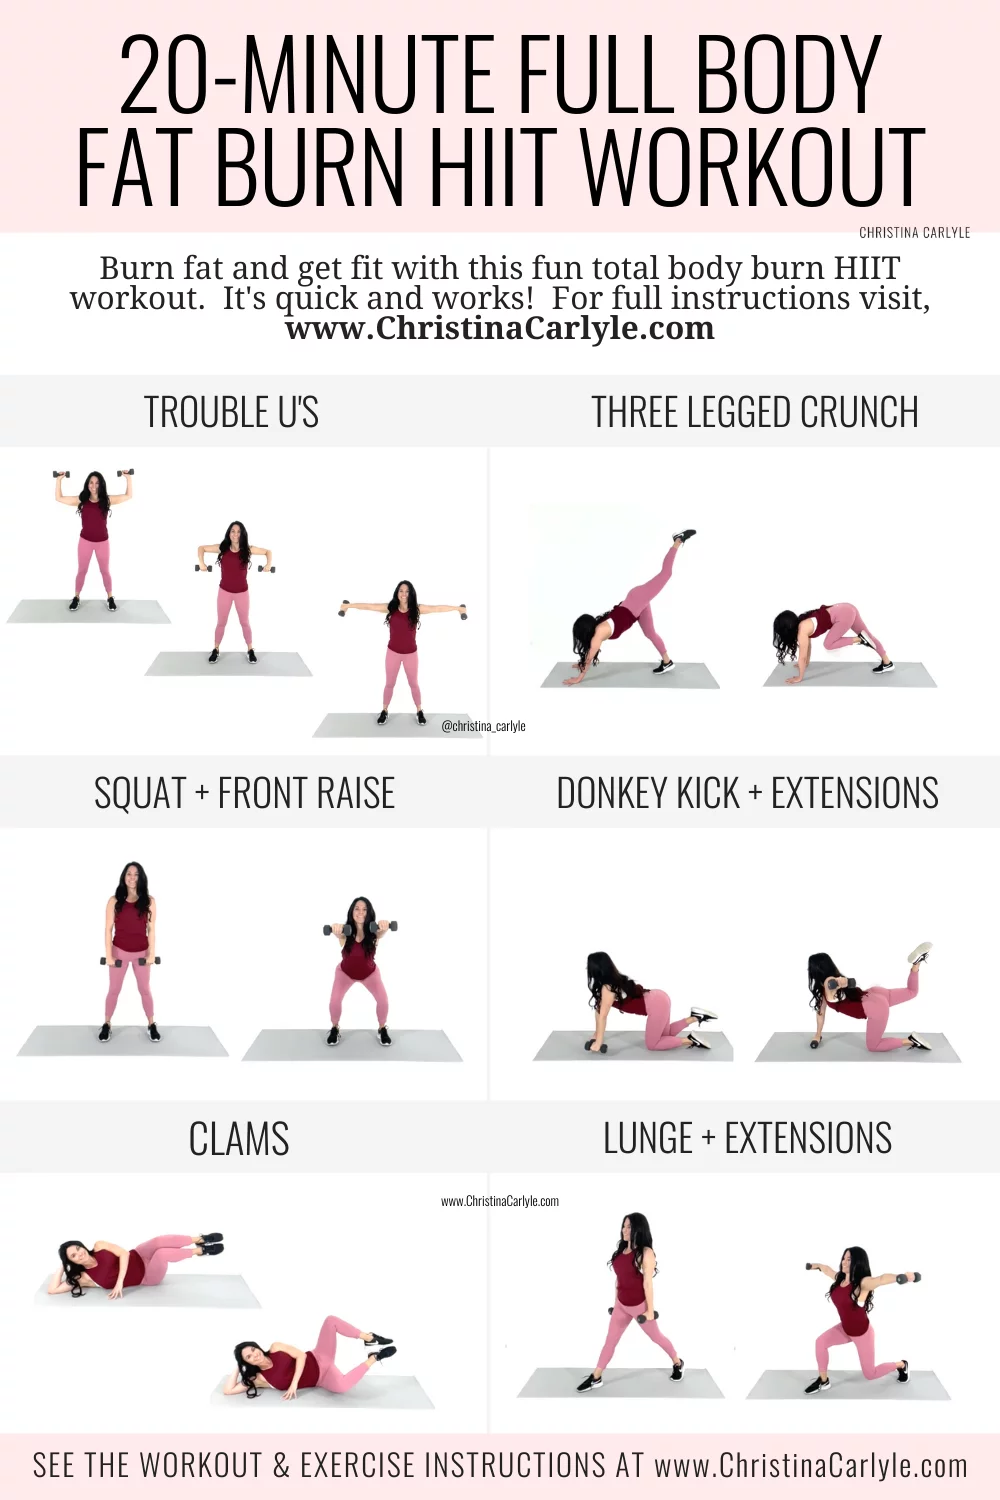 https://www.christinacarlyle.com/wp-content/uploads/2018/06/HIIT-Workout-for-Women-Christina-Carlyle.png